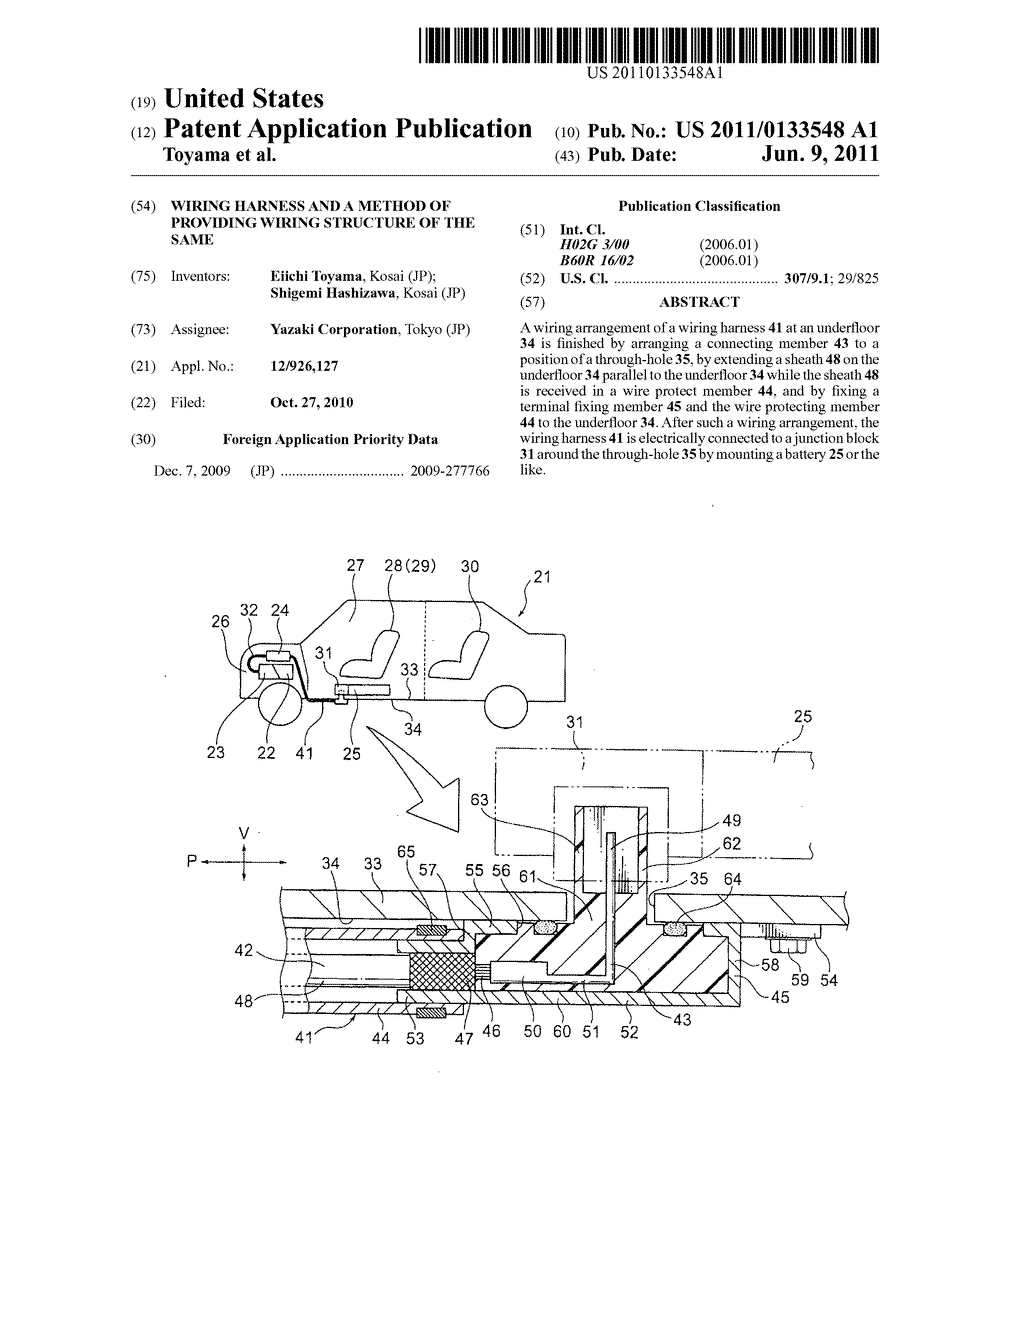 Wiring harness and a method of providing wiring structure of the same - diagram, schematic, and image 01